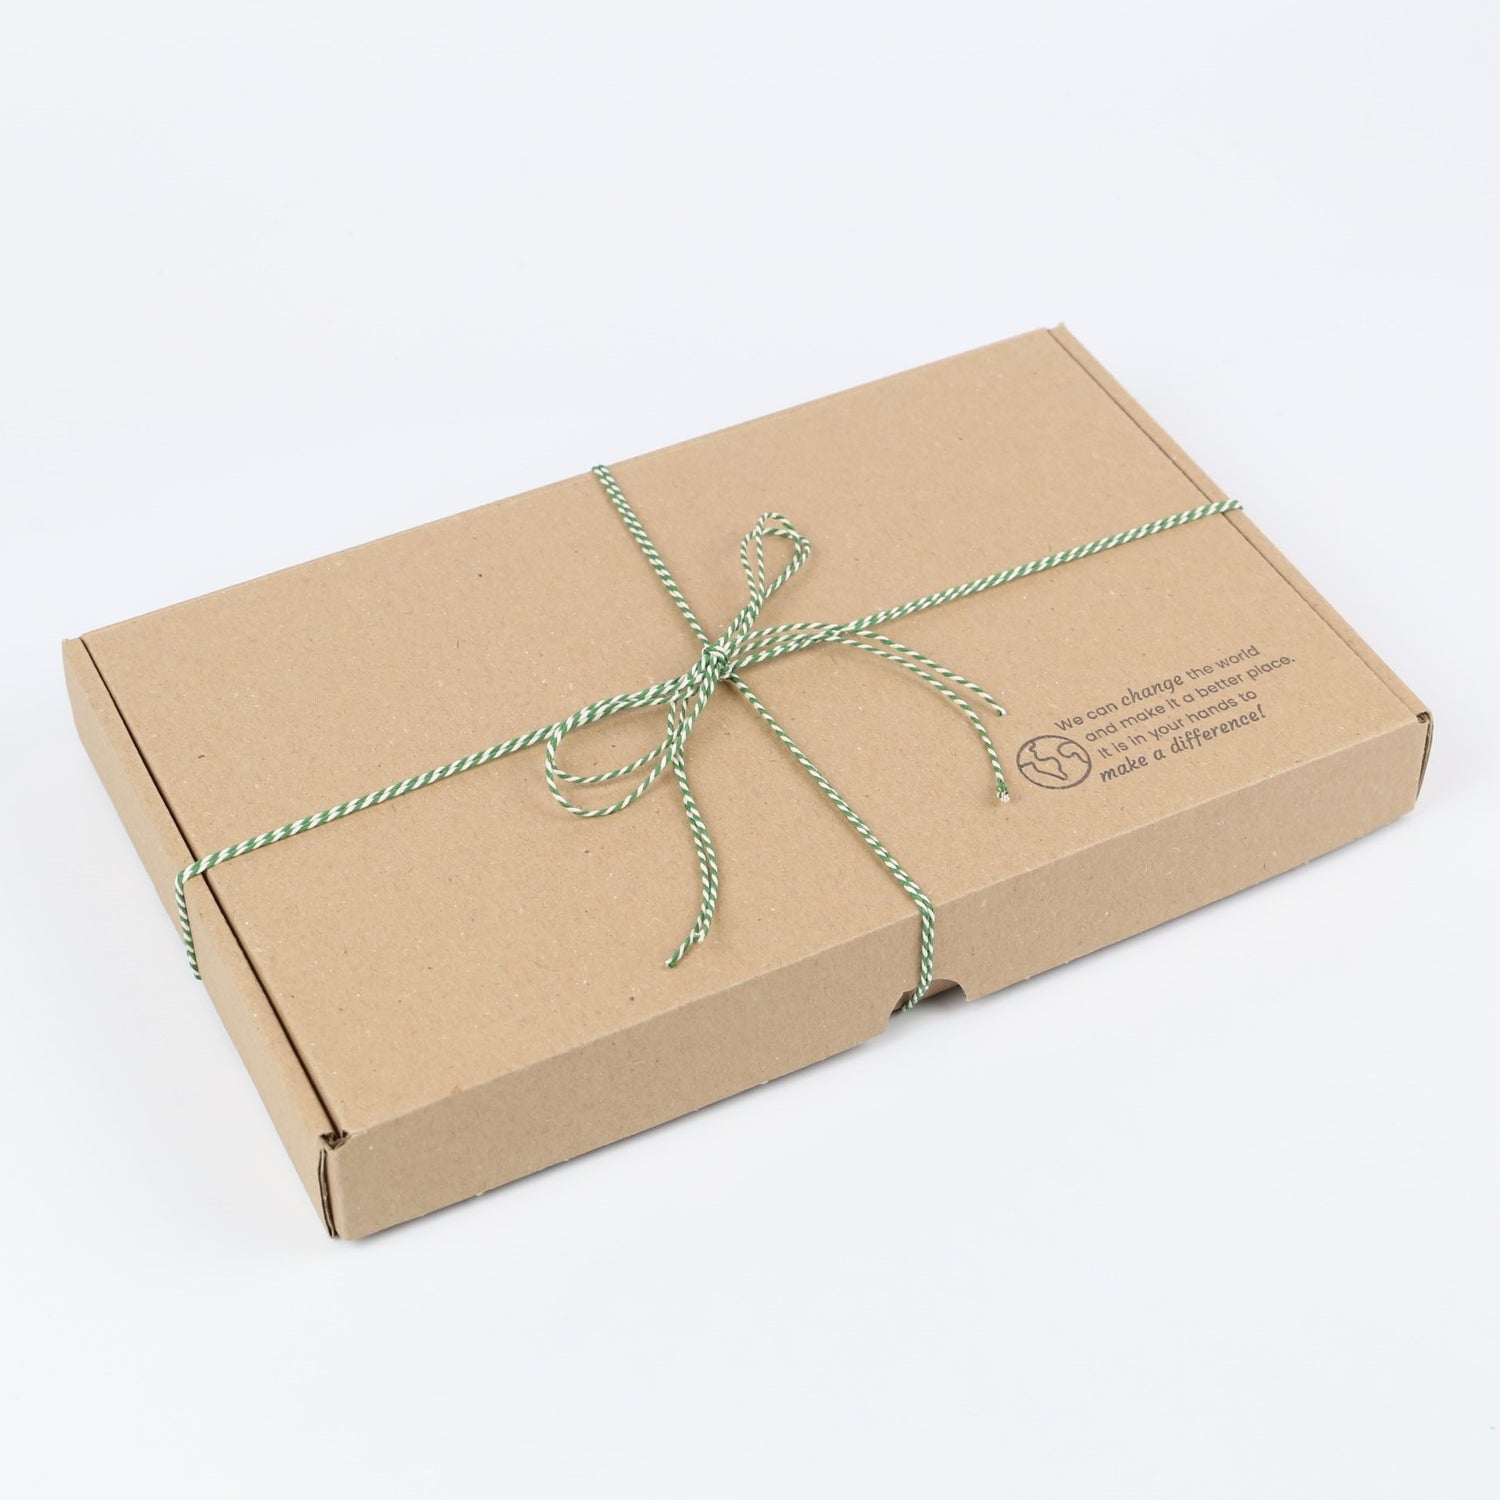 eco gift box made in kraft brown paper